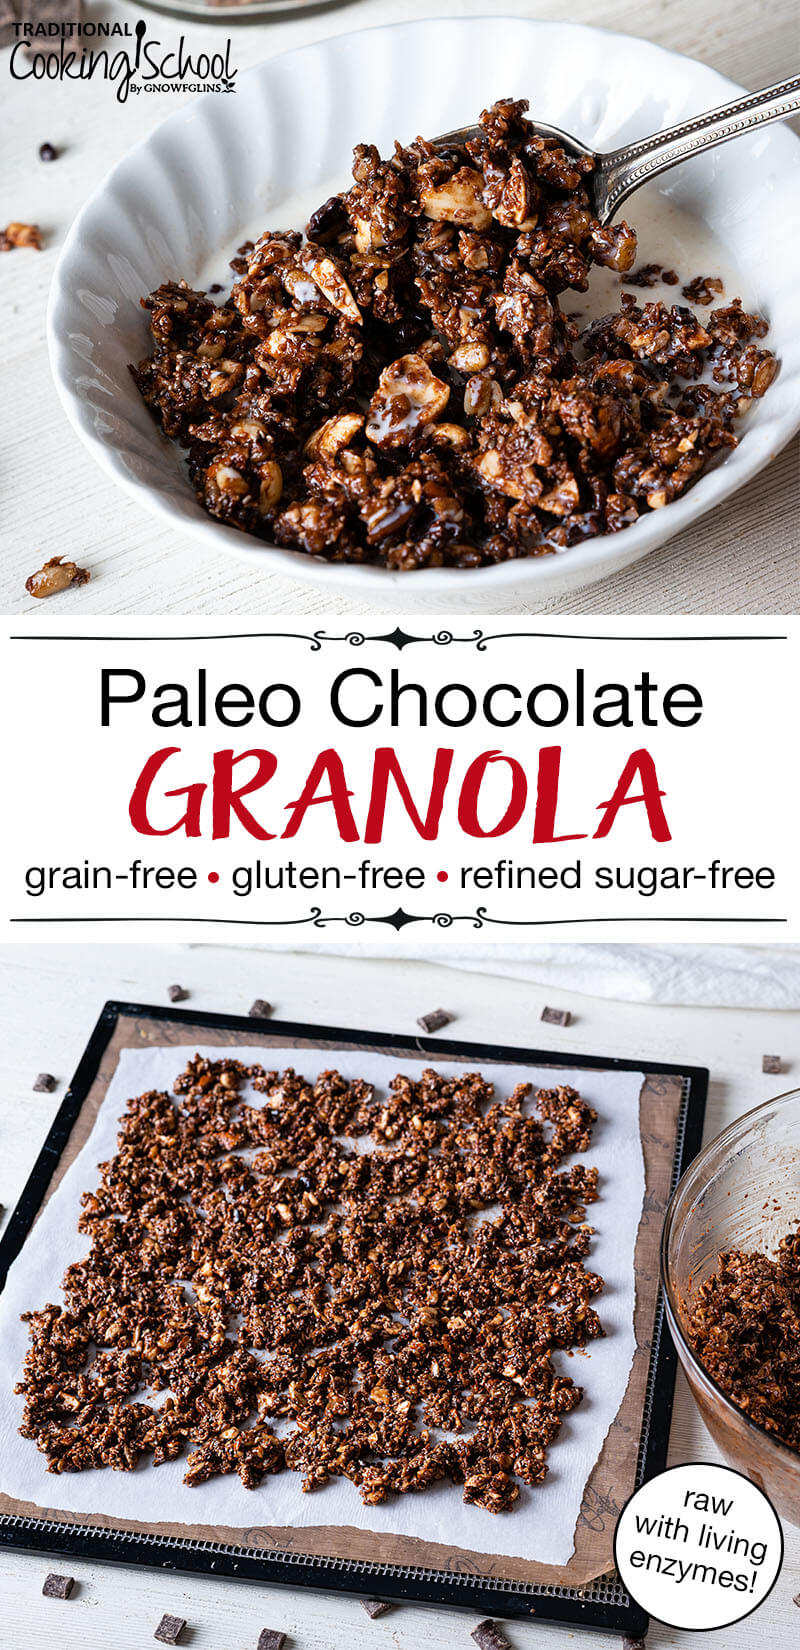 photo collage of dehydrating granola, and white bowl filled with chocolate paleo granola and milk being poured over the top. Text overlay: "Paleo Chocolate Granola: grain-free, gluten-free, refined sugar-free (raw with living enzymes!)"